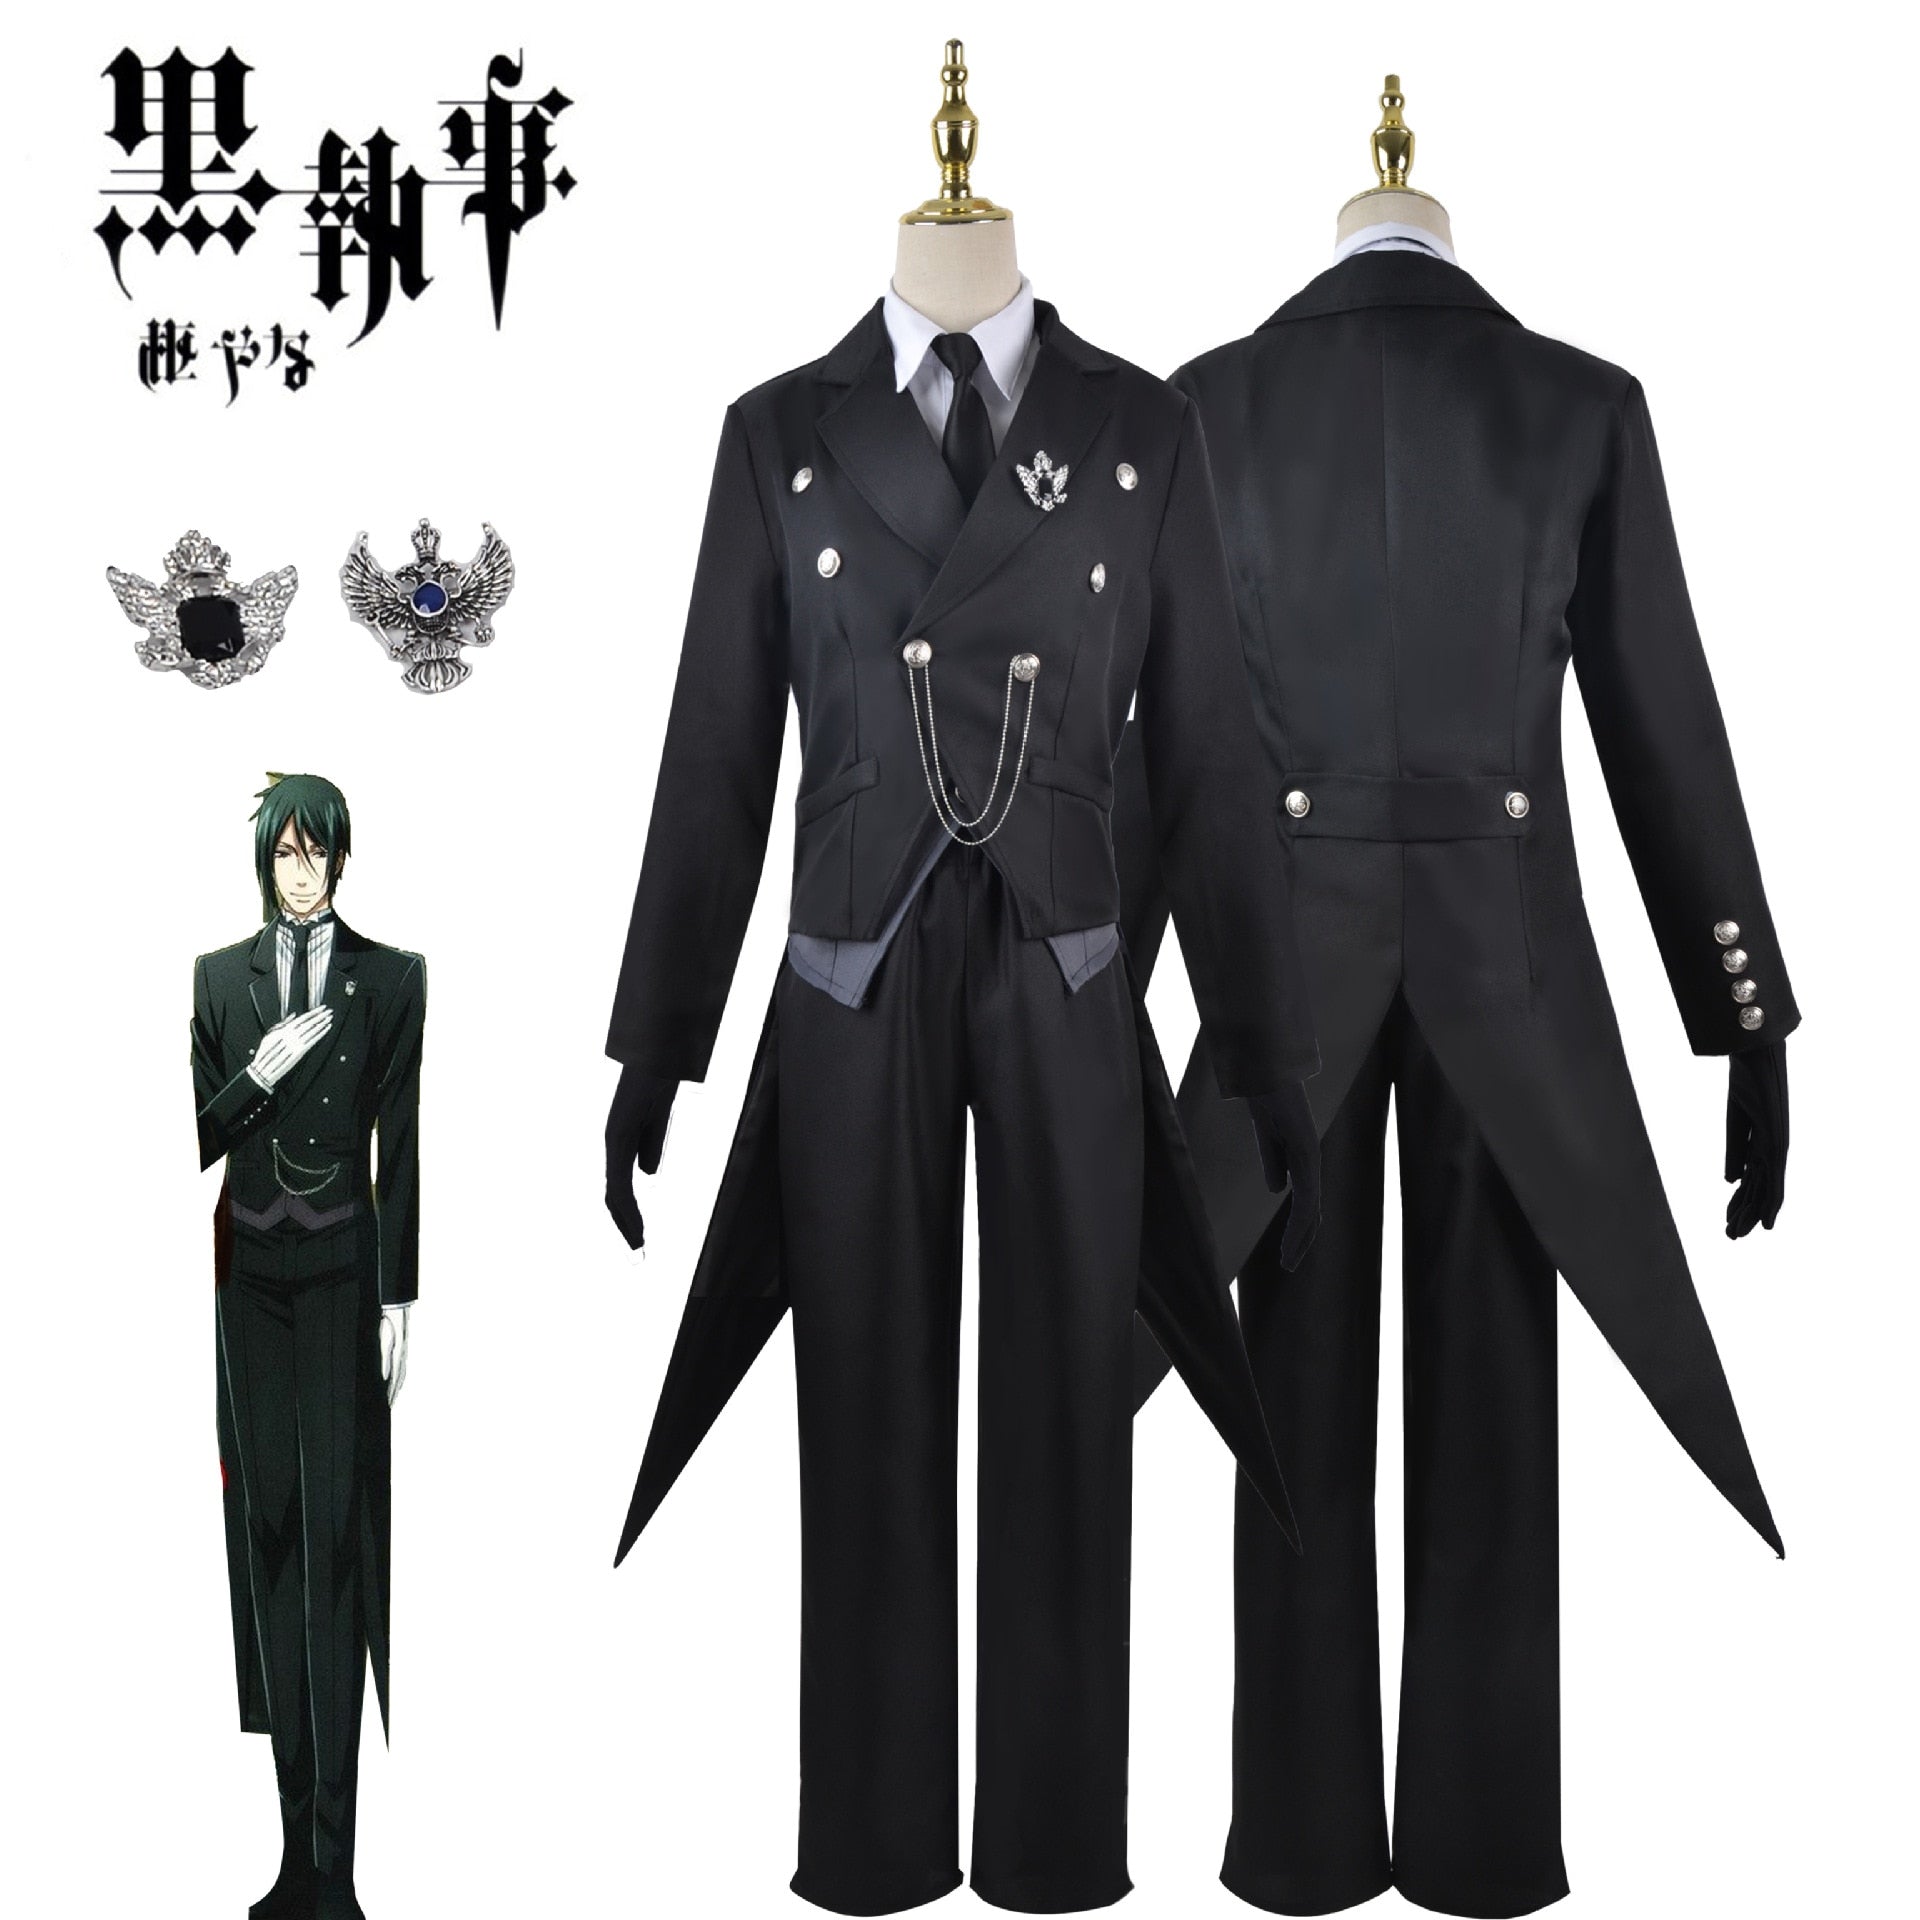 Image of a Sebastian Michaelis Cosplay Costume from the anime Black Butler